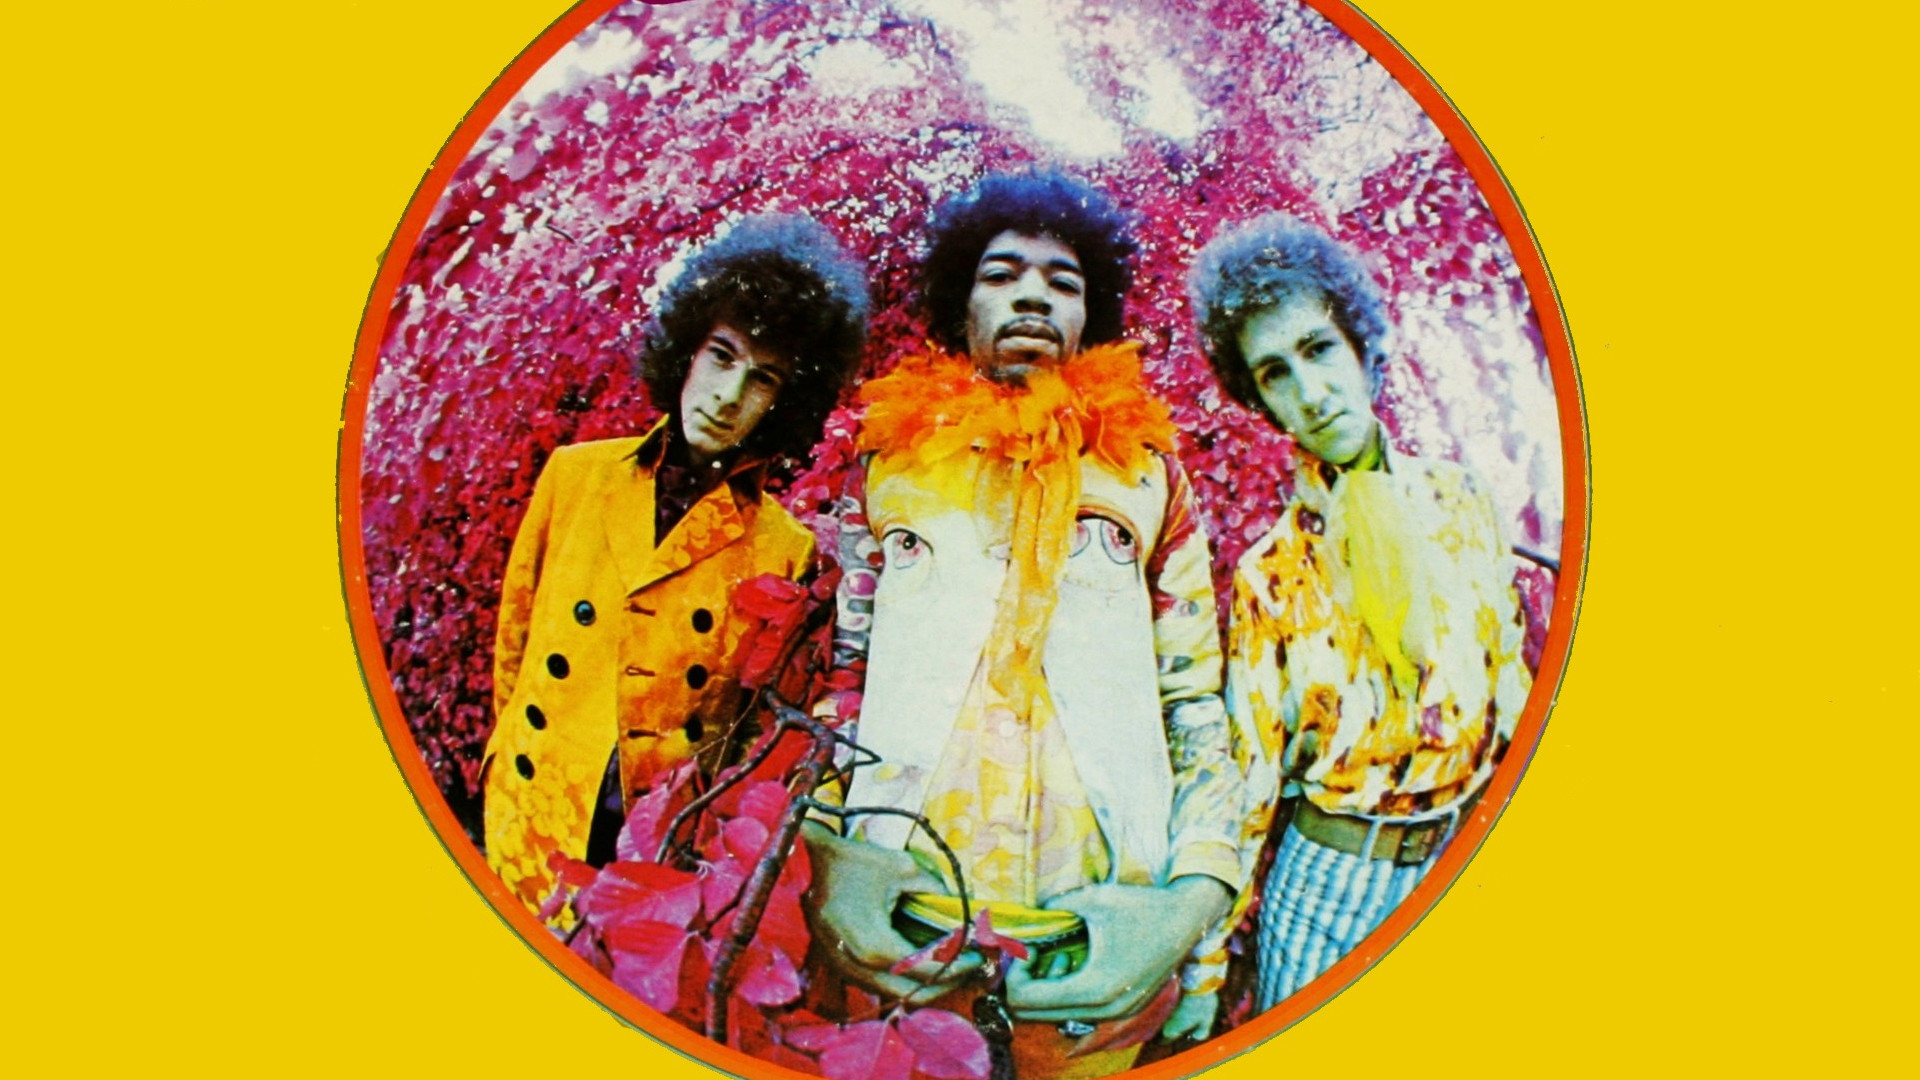 1920x1080 The Jimi Hendrix Experience - Are You Experienced? (1920 x 1080)